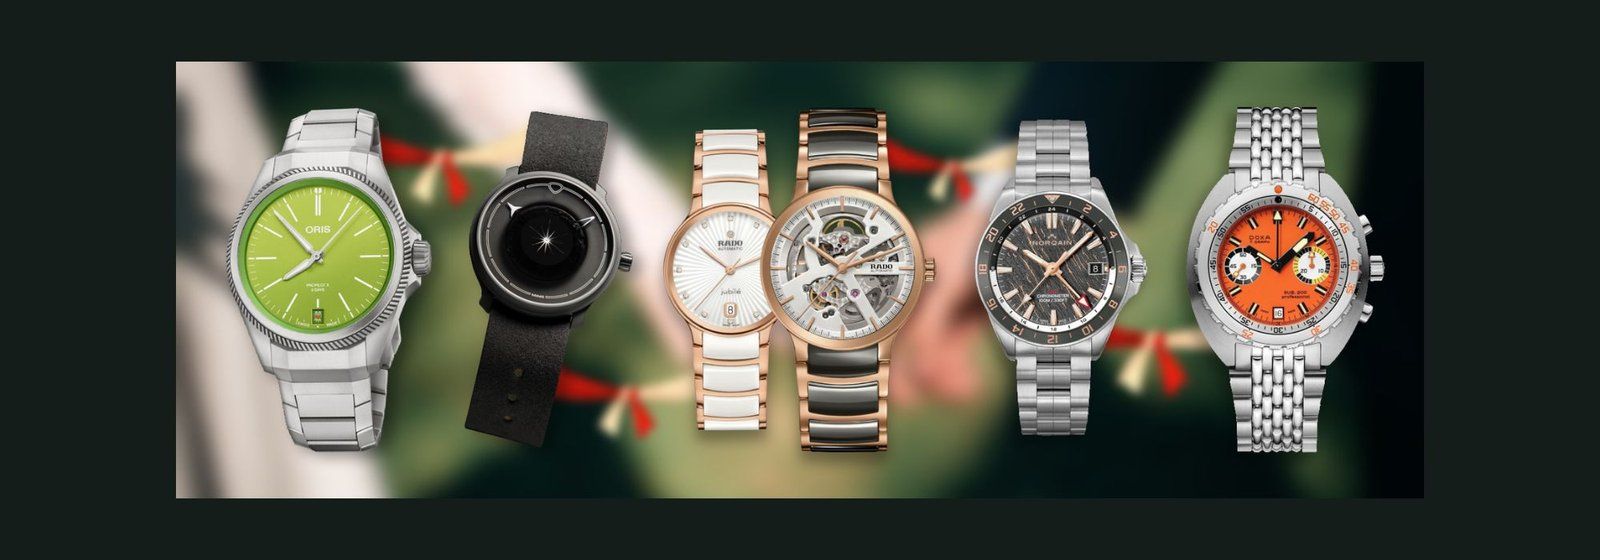 5 Timepieces That’ll Make Meaningful Gifts This Wedding Season